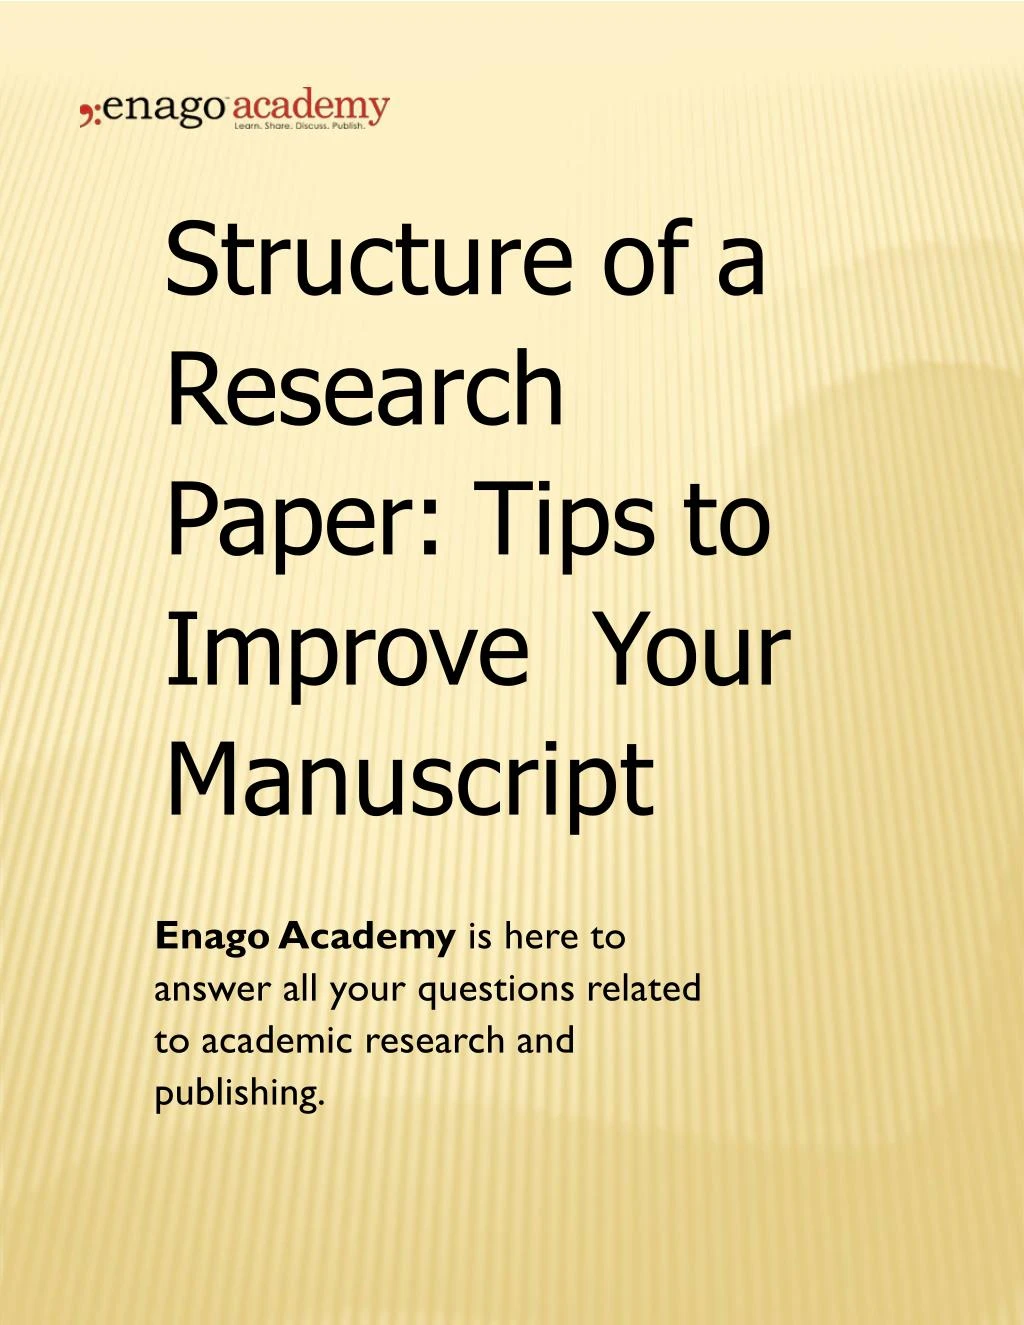 structure of a research paper tips to improve